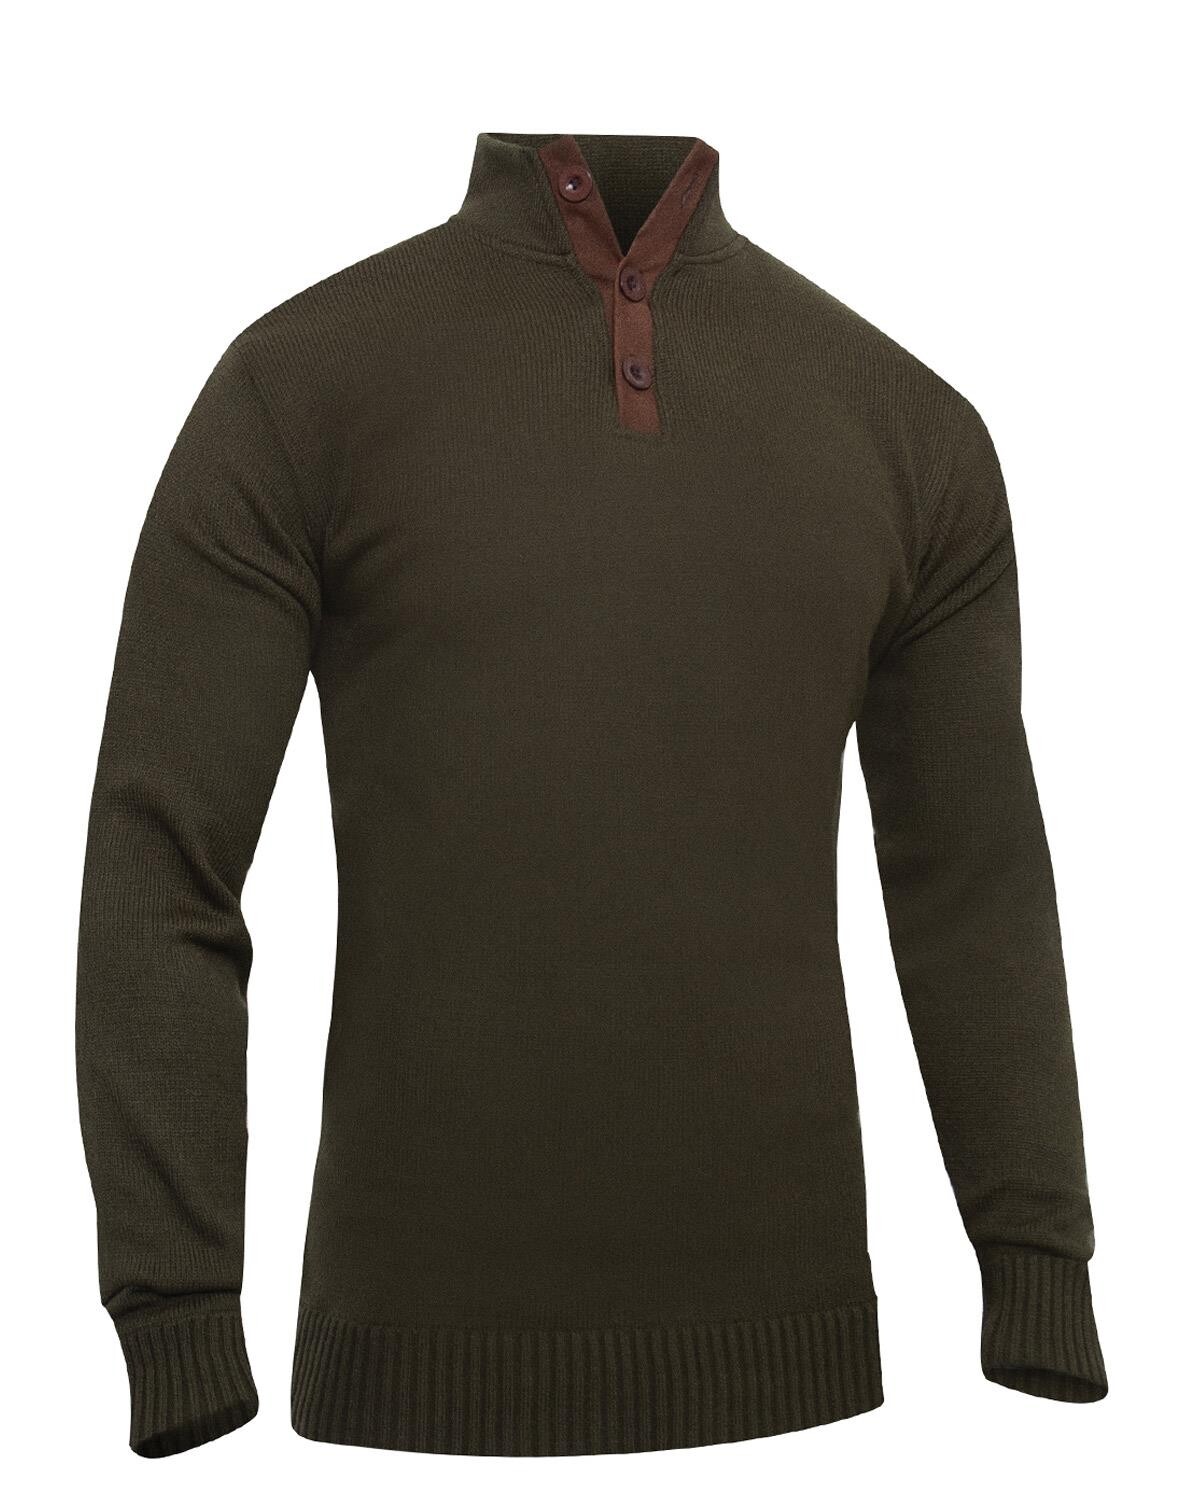 5: Rothco 3-Button Sweater With Suede Accents (Oliven, 2XL)